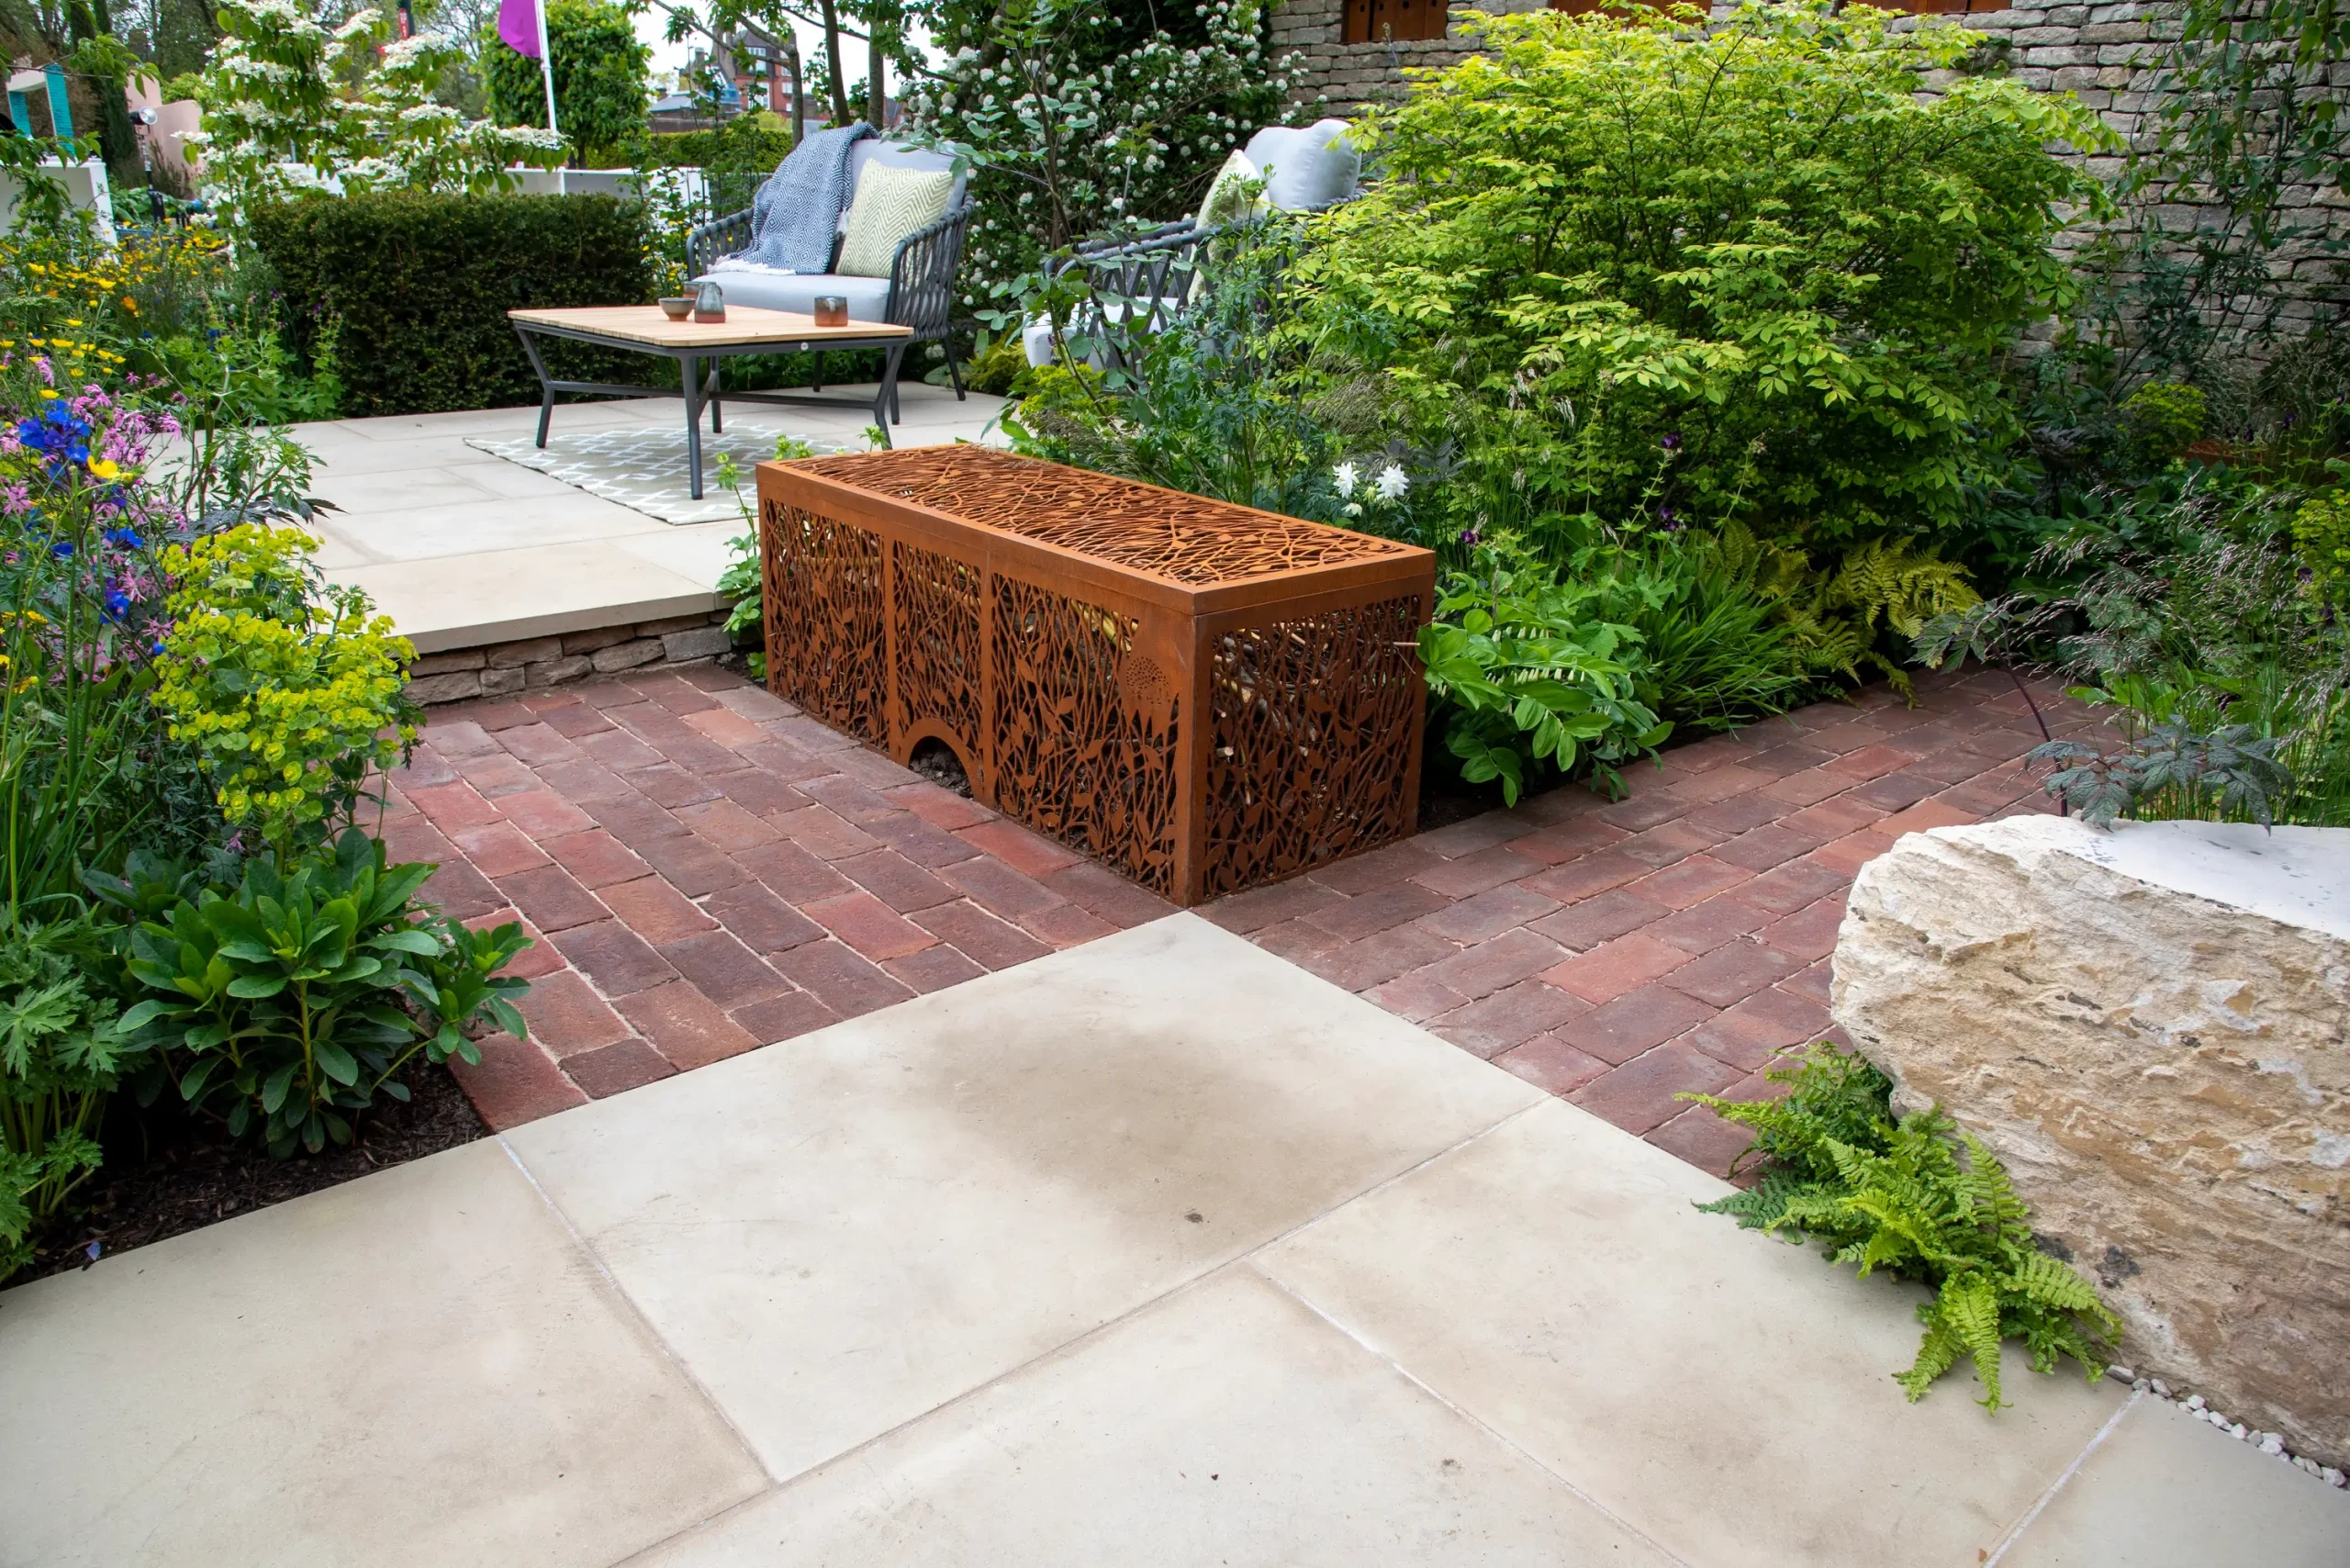 Britannia Buff Yorkstone with Dorset Antique clay pavers, corten steel benches and planting.